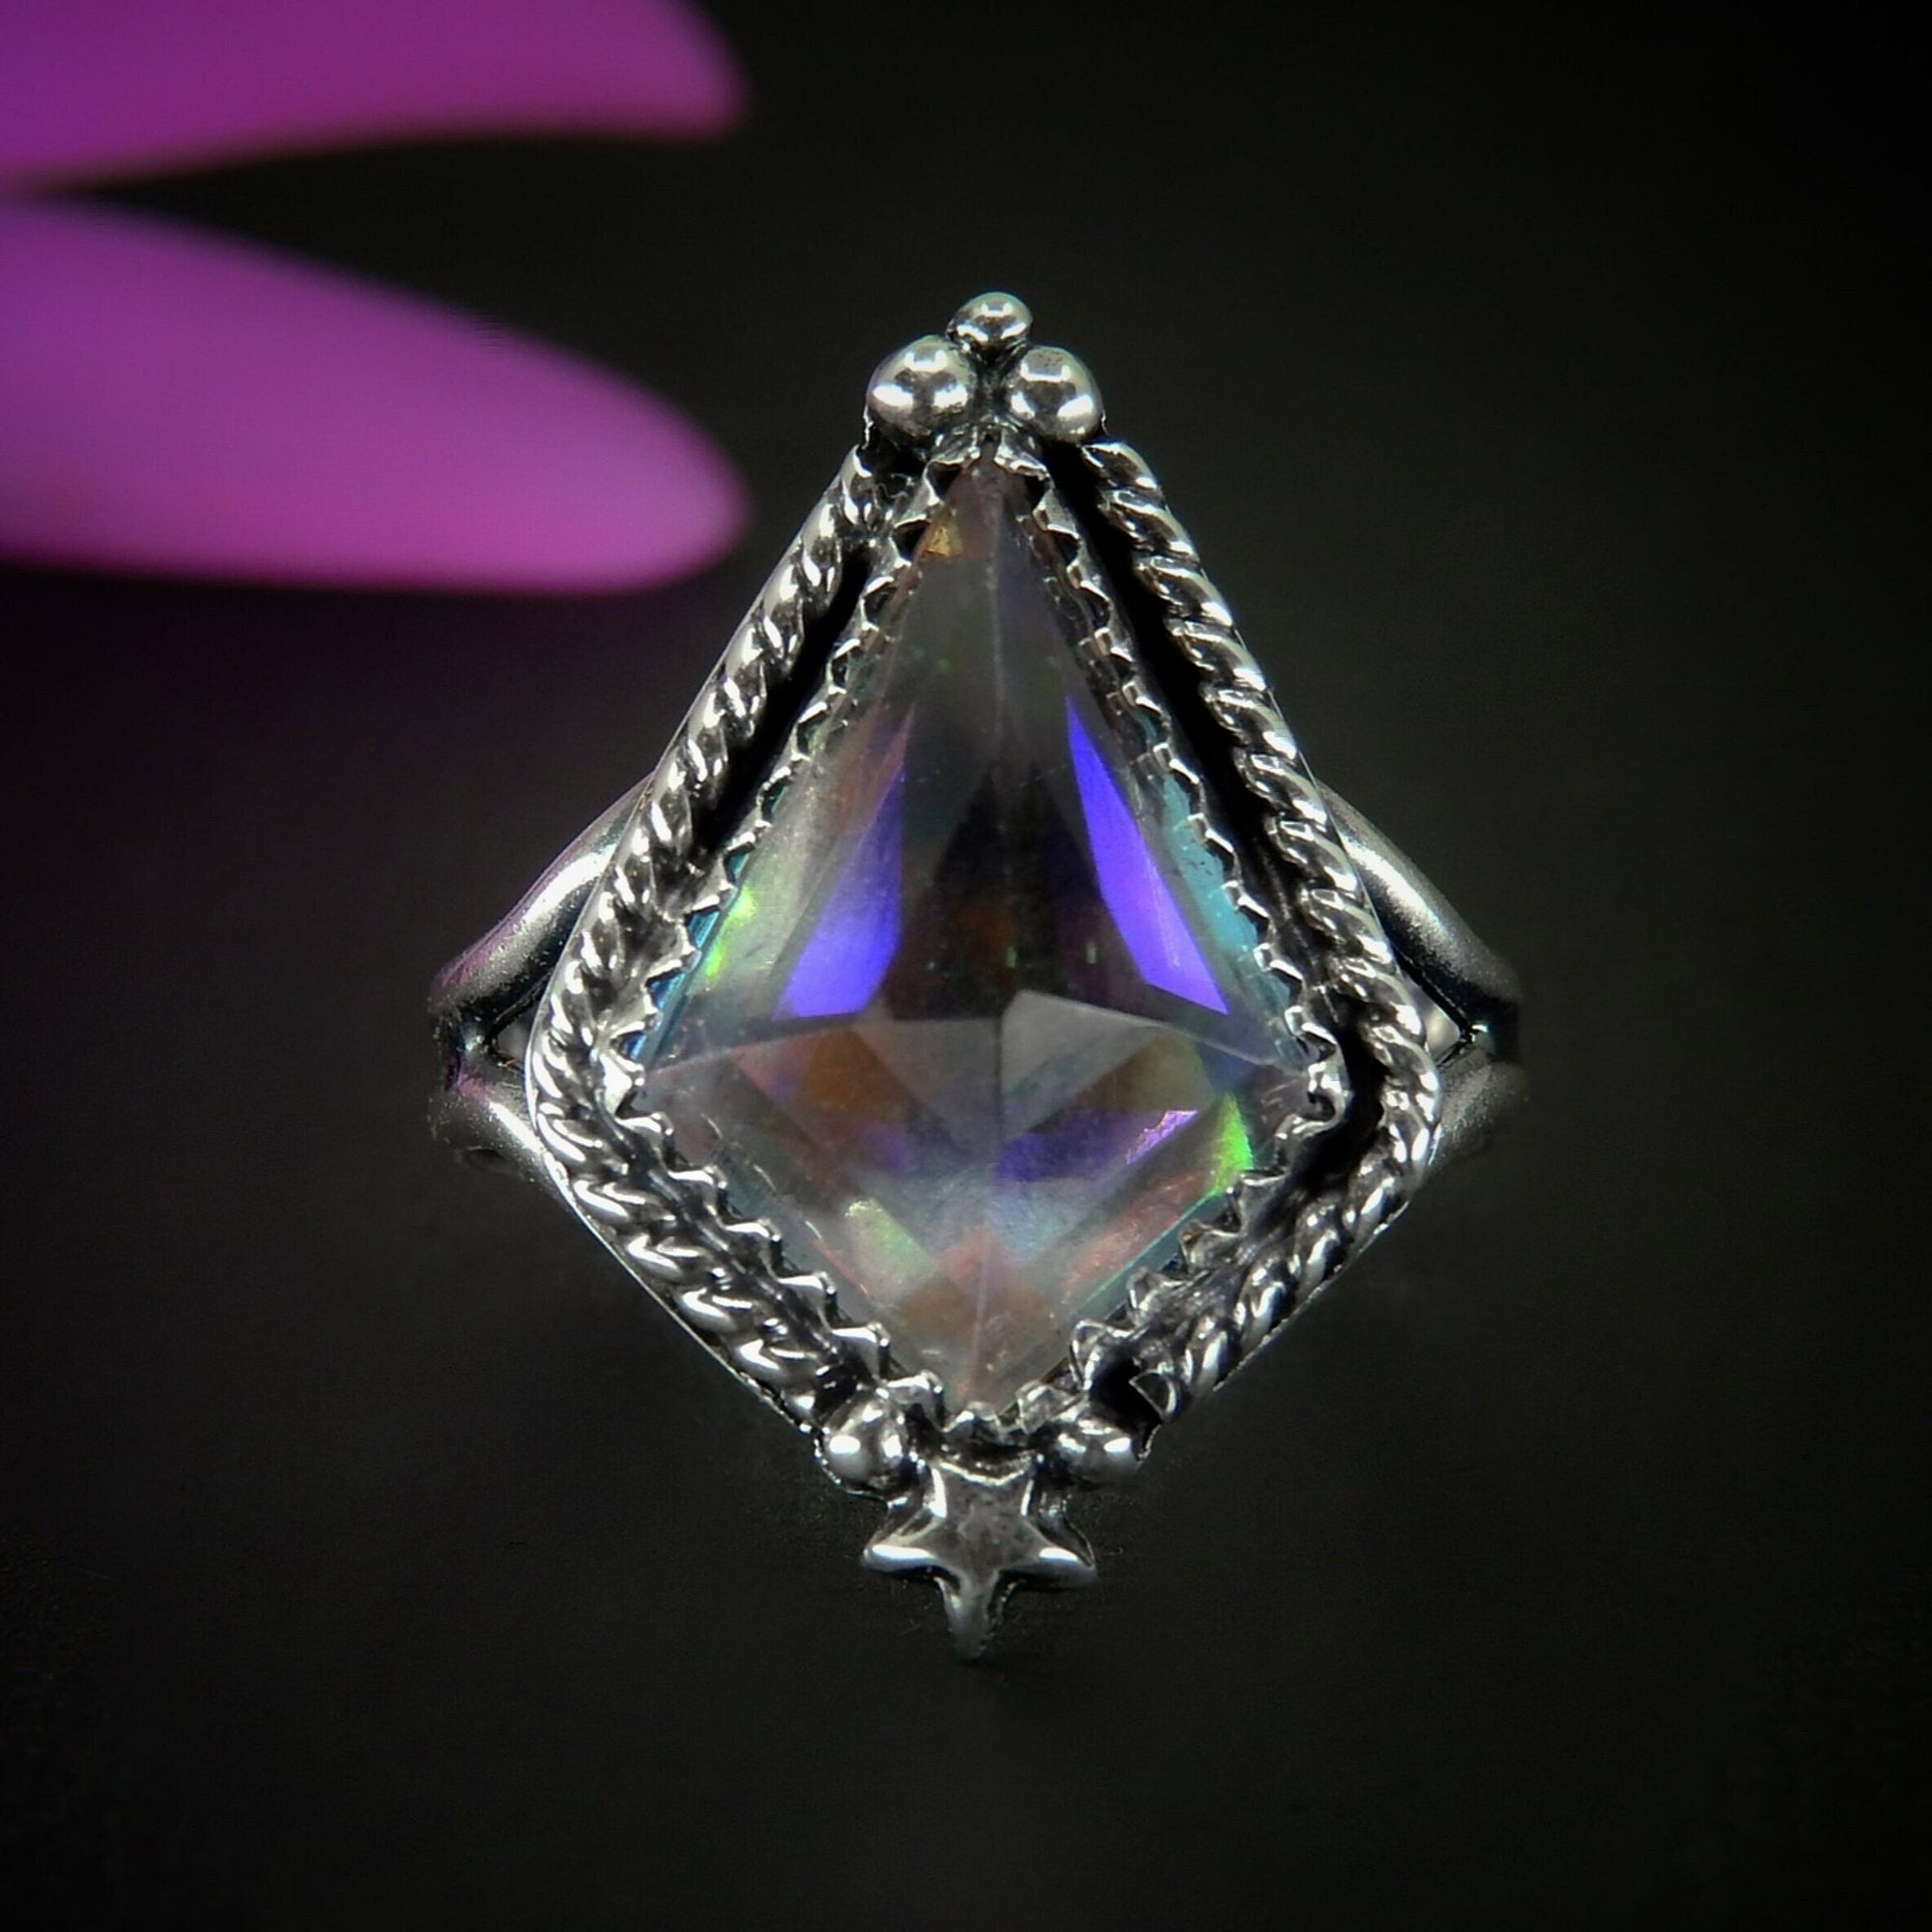 Angel Aura Quartz Ring - Size 9 - Sterling Silver - Angel Aura Quartz Star Ring - Kite Shaped Aura Quartz Jewelry - Faceted Rainbow Crystal